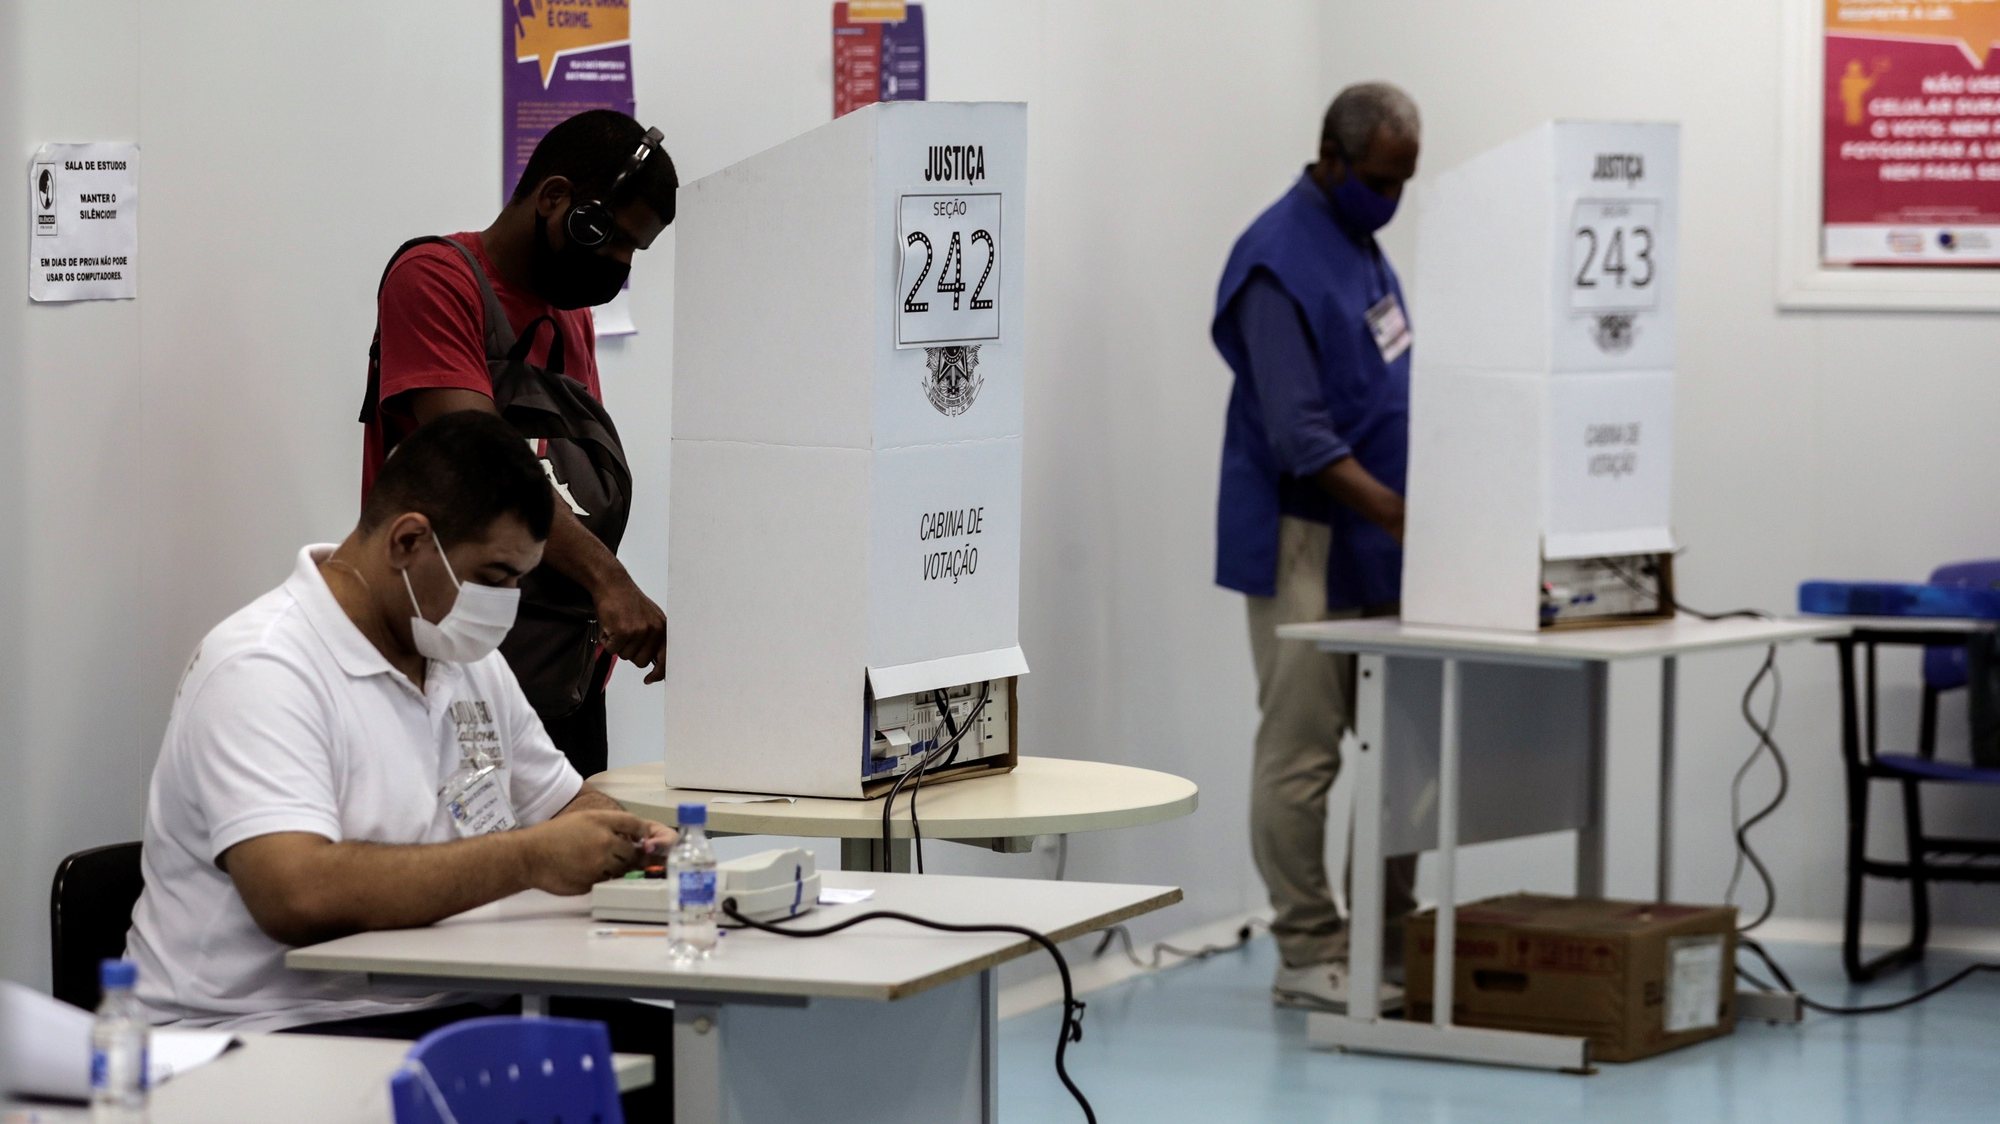 epa08821825 Citizens vote at a polling station during local election in Rio de Janeiro, Brazil, 15 November 2020. Voters are to elect mayors and councelmen  in some 5,596 Brazilian towns for next four years.  EPA/Antonio Lacerda